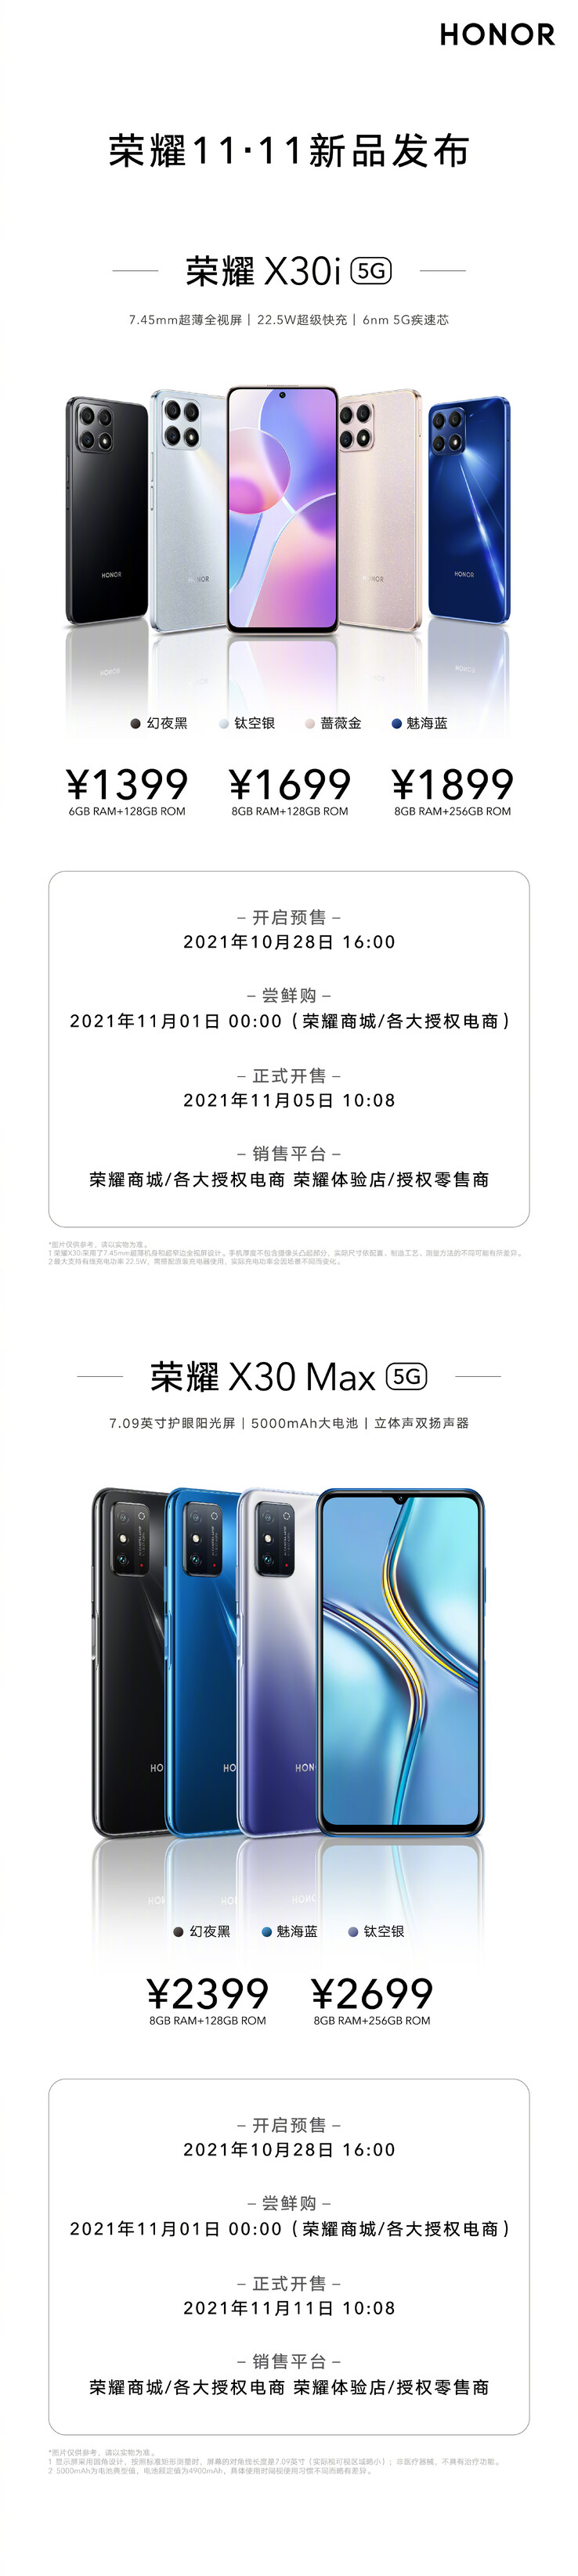 Honor unveils the X30i and X30 Max with 3 colorways each. (Source: Honor via Weibo)